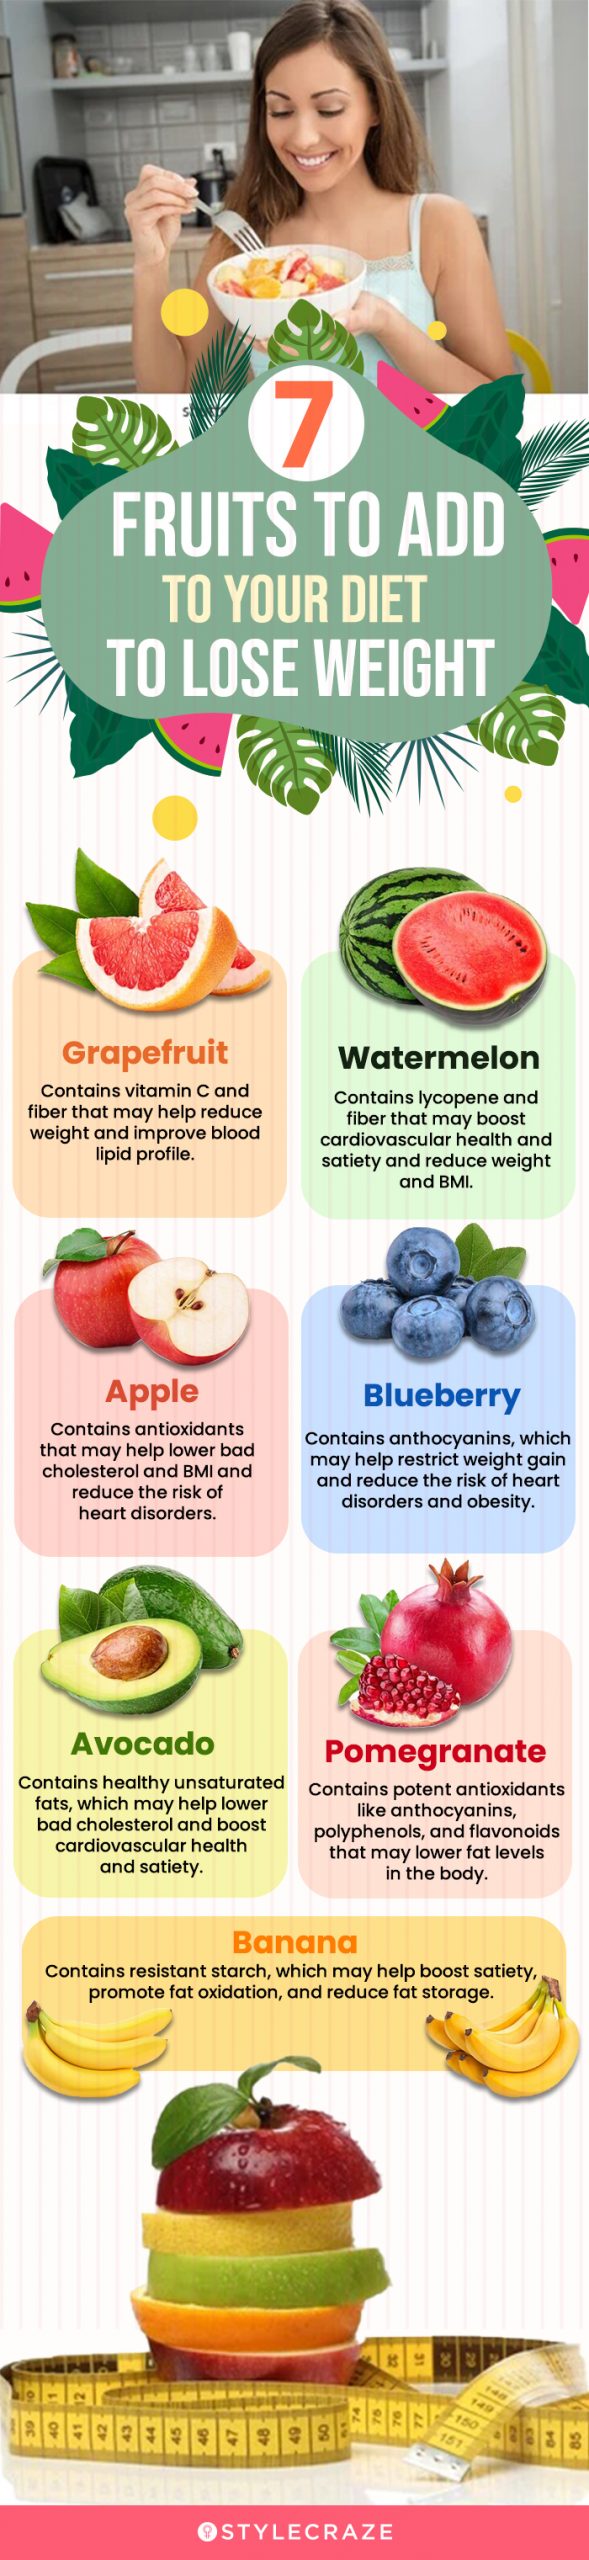 7 fruits to add to your diet to lose weight (infographic)